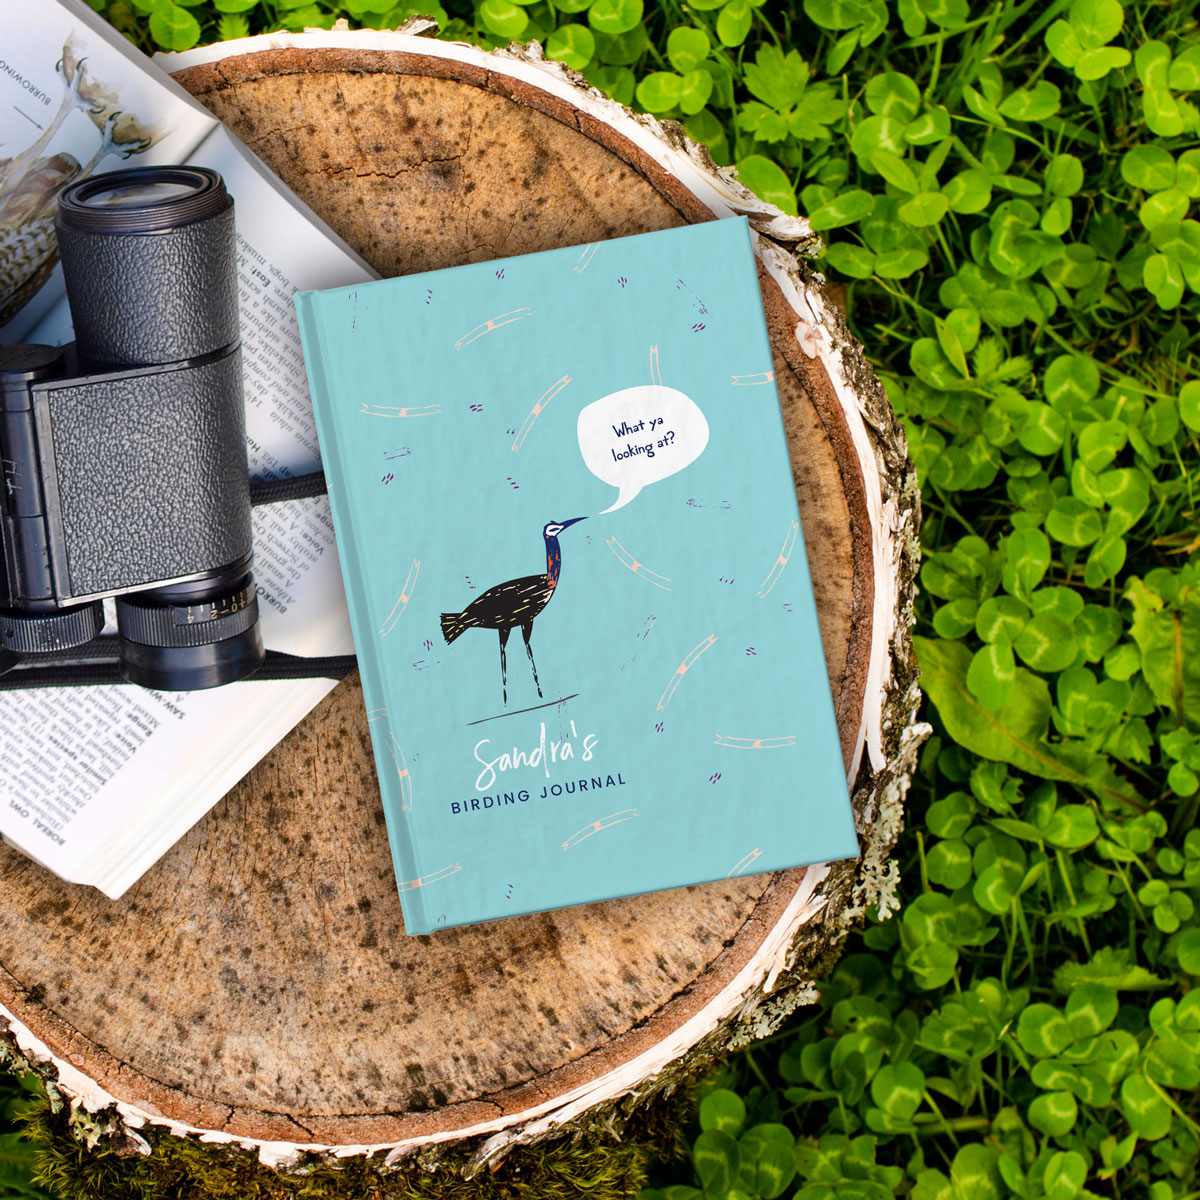 Personalized Birding Journal – What ya looking at?